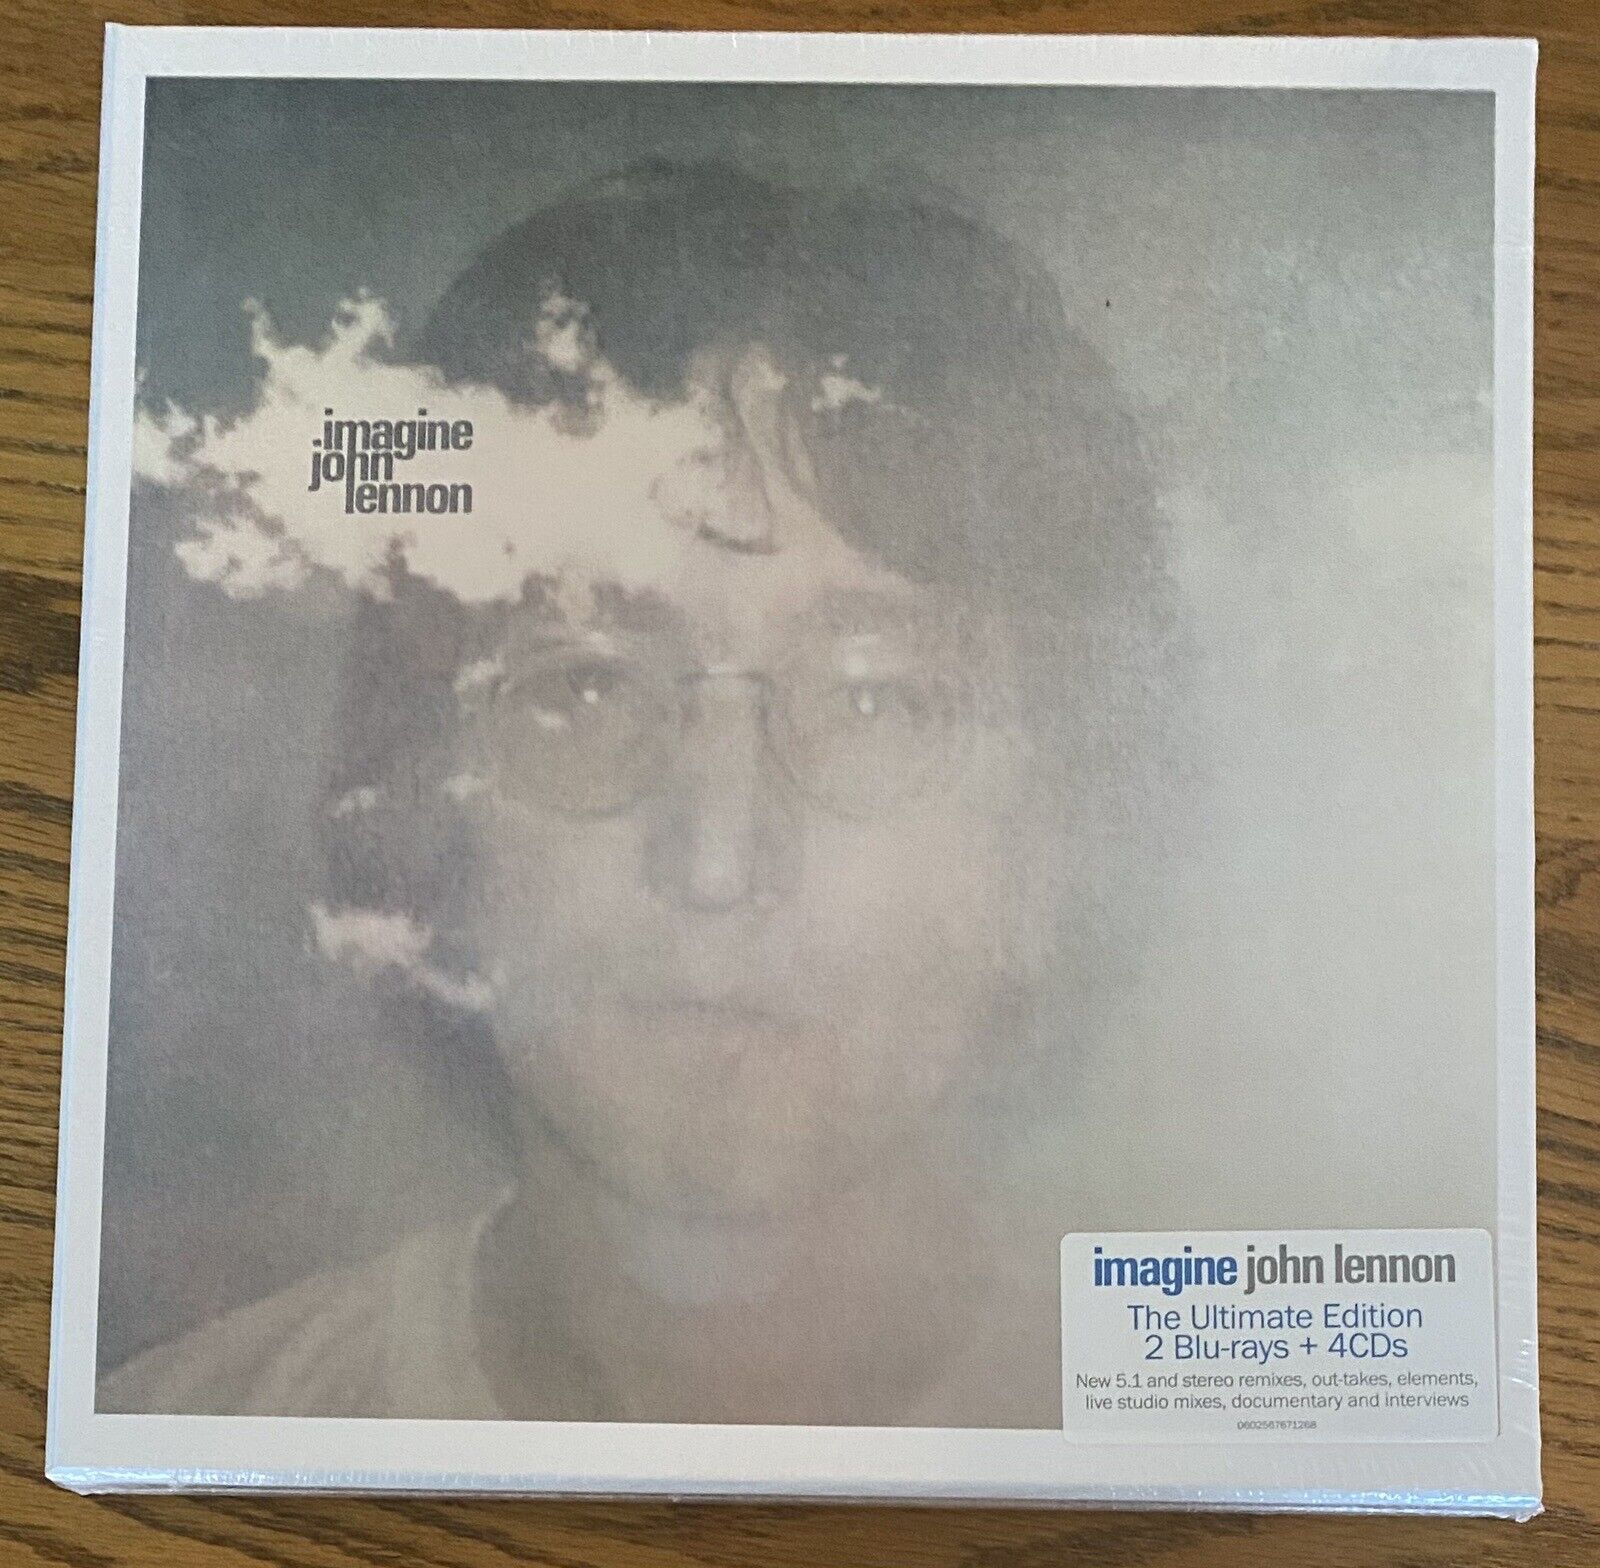 Imagine: The Ultimate Collection John Lennon 6 Disc Set (2018) Factory Sealed